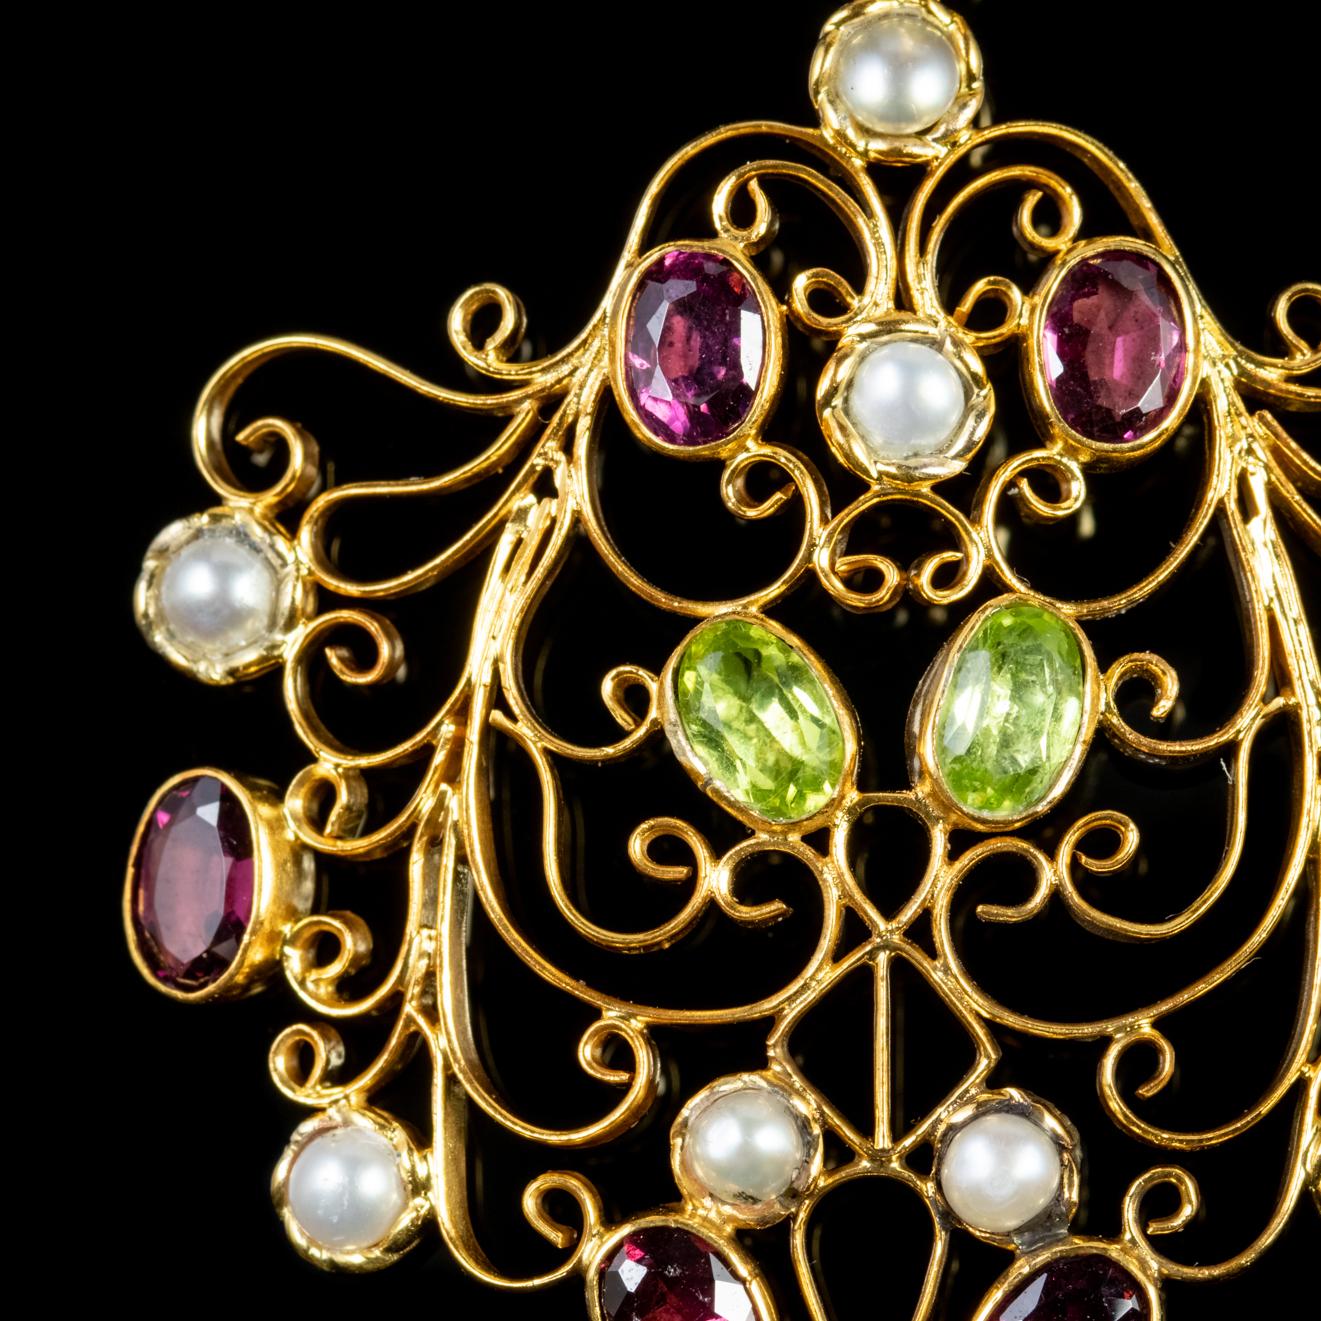 A fabulous antique Edwardian Suffragette pendant decorated with Peridots, Almandine Garnets and Pearls with a Pearl dropper hanging below. 

Suffragette jewellery was worn to show one’s allegiance to the women’s Suffragette movement in the early